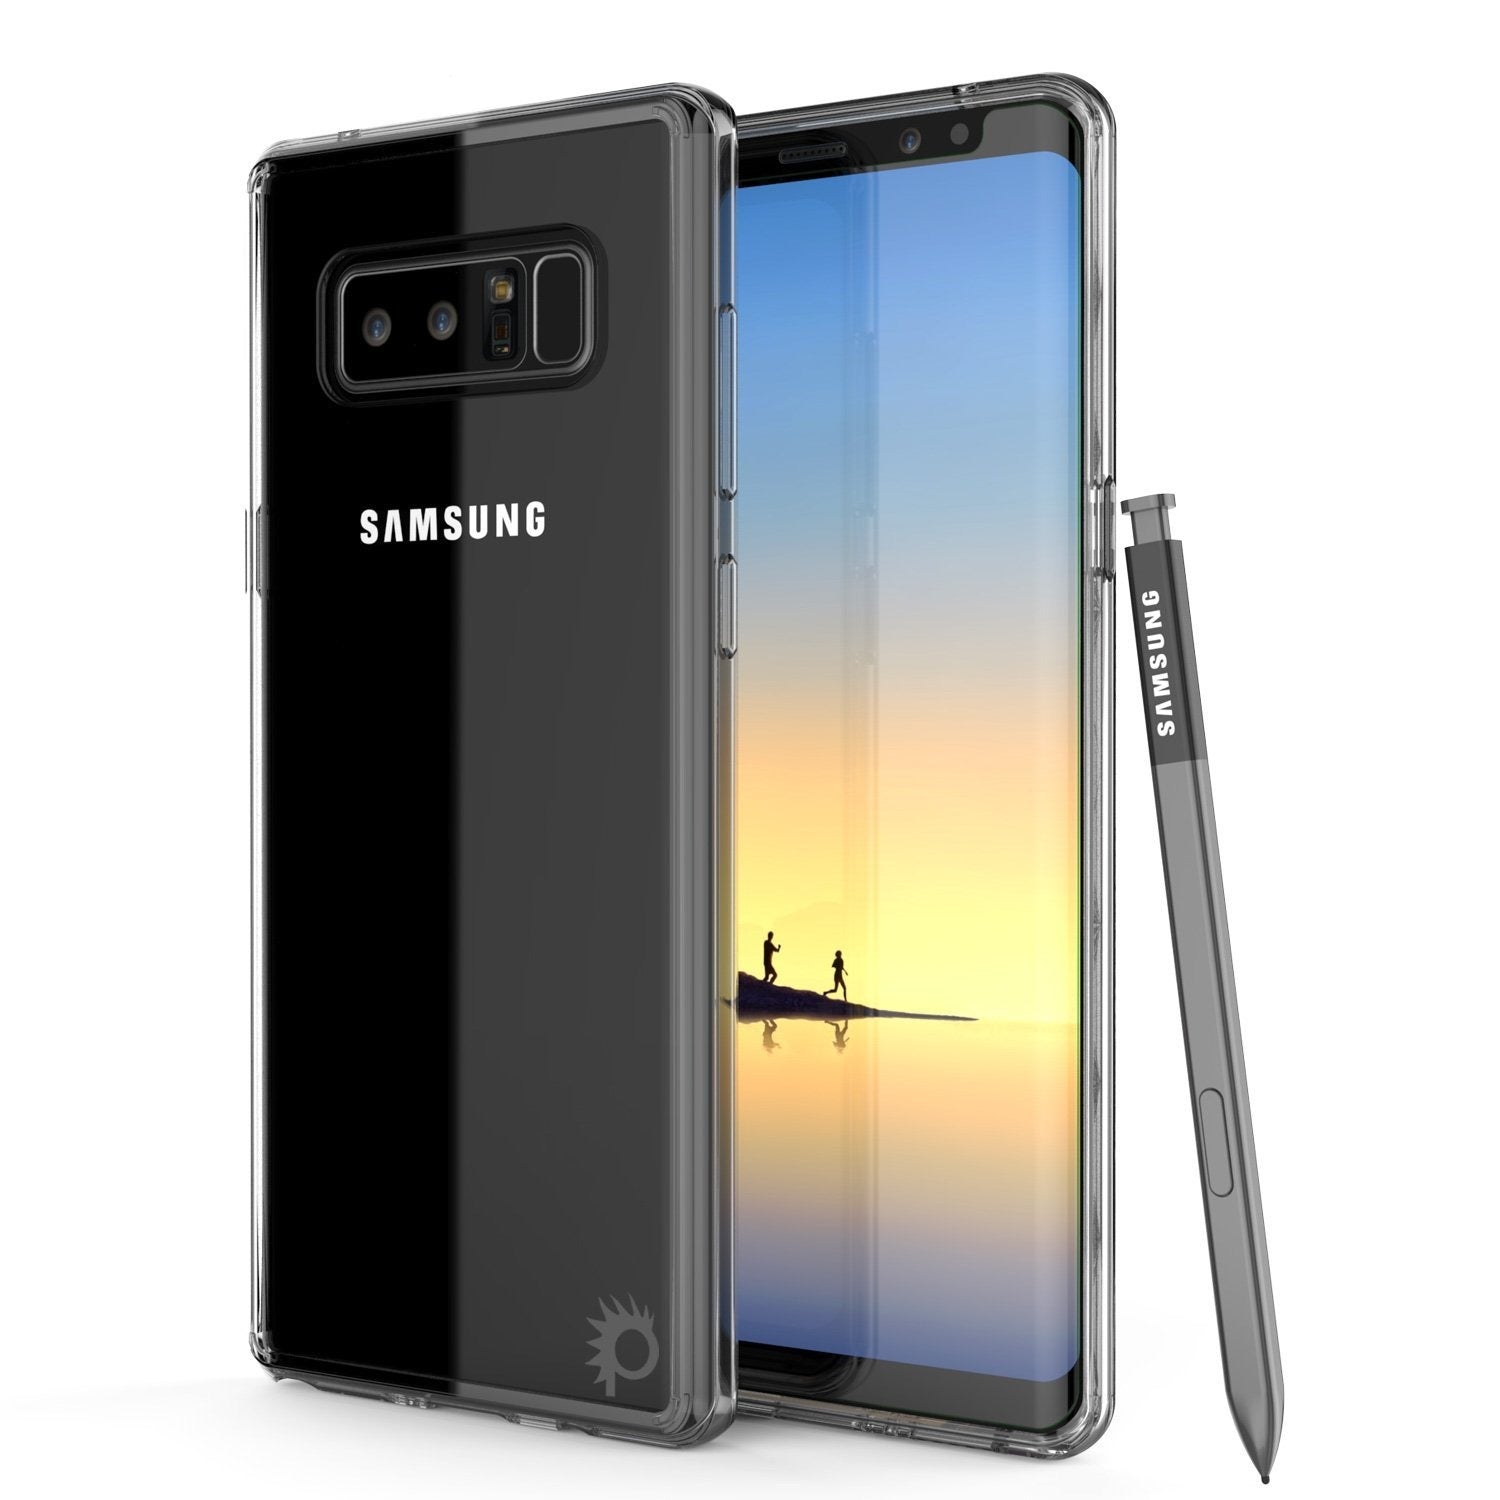 Galaxy Note 8 Case, PUNKcase [LUCID 2.0 Series] [Slim Fit] Armor Cover w/Integrated Anti-Shock System & Screen Protector [Clear] (Color in image: Clear)